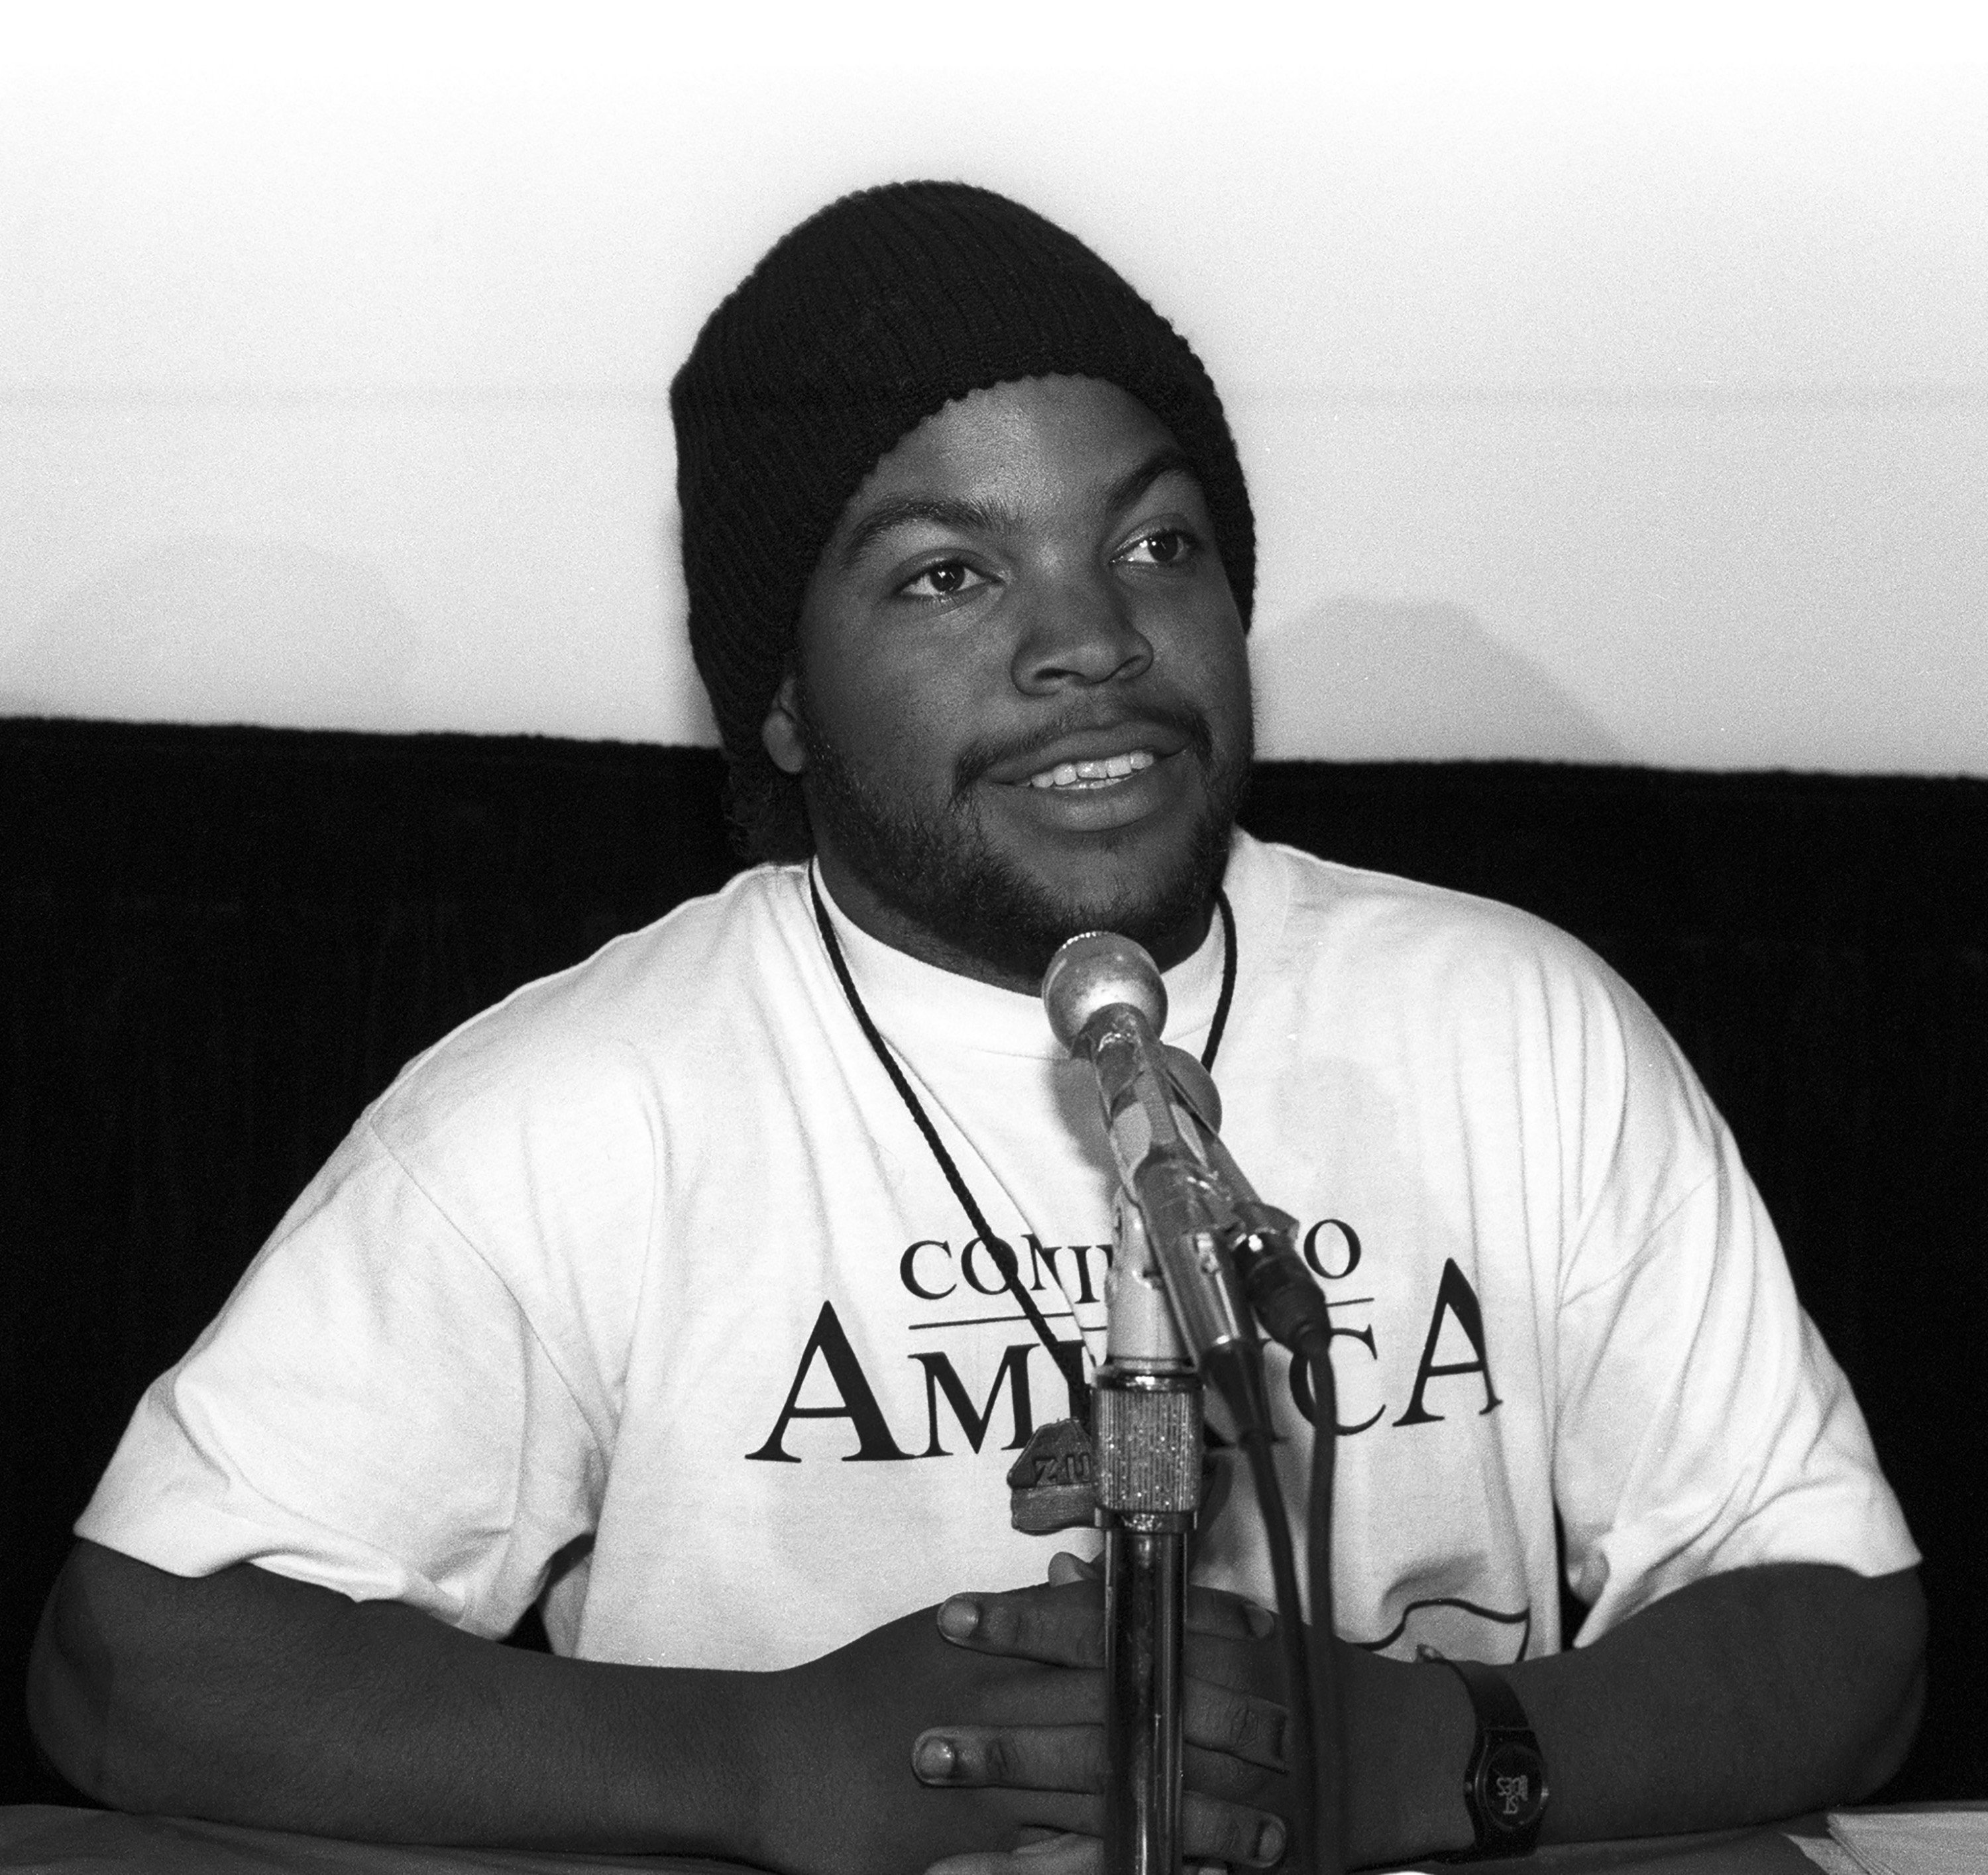 Ice Cube wearing a shirt advertising Coming to America